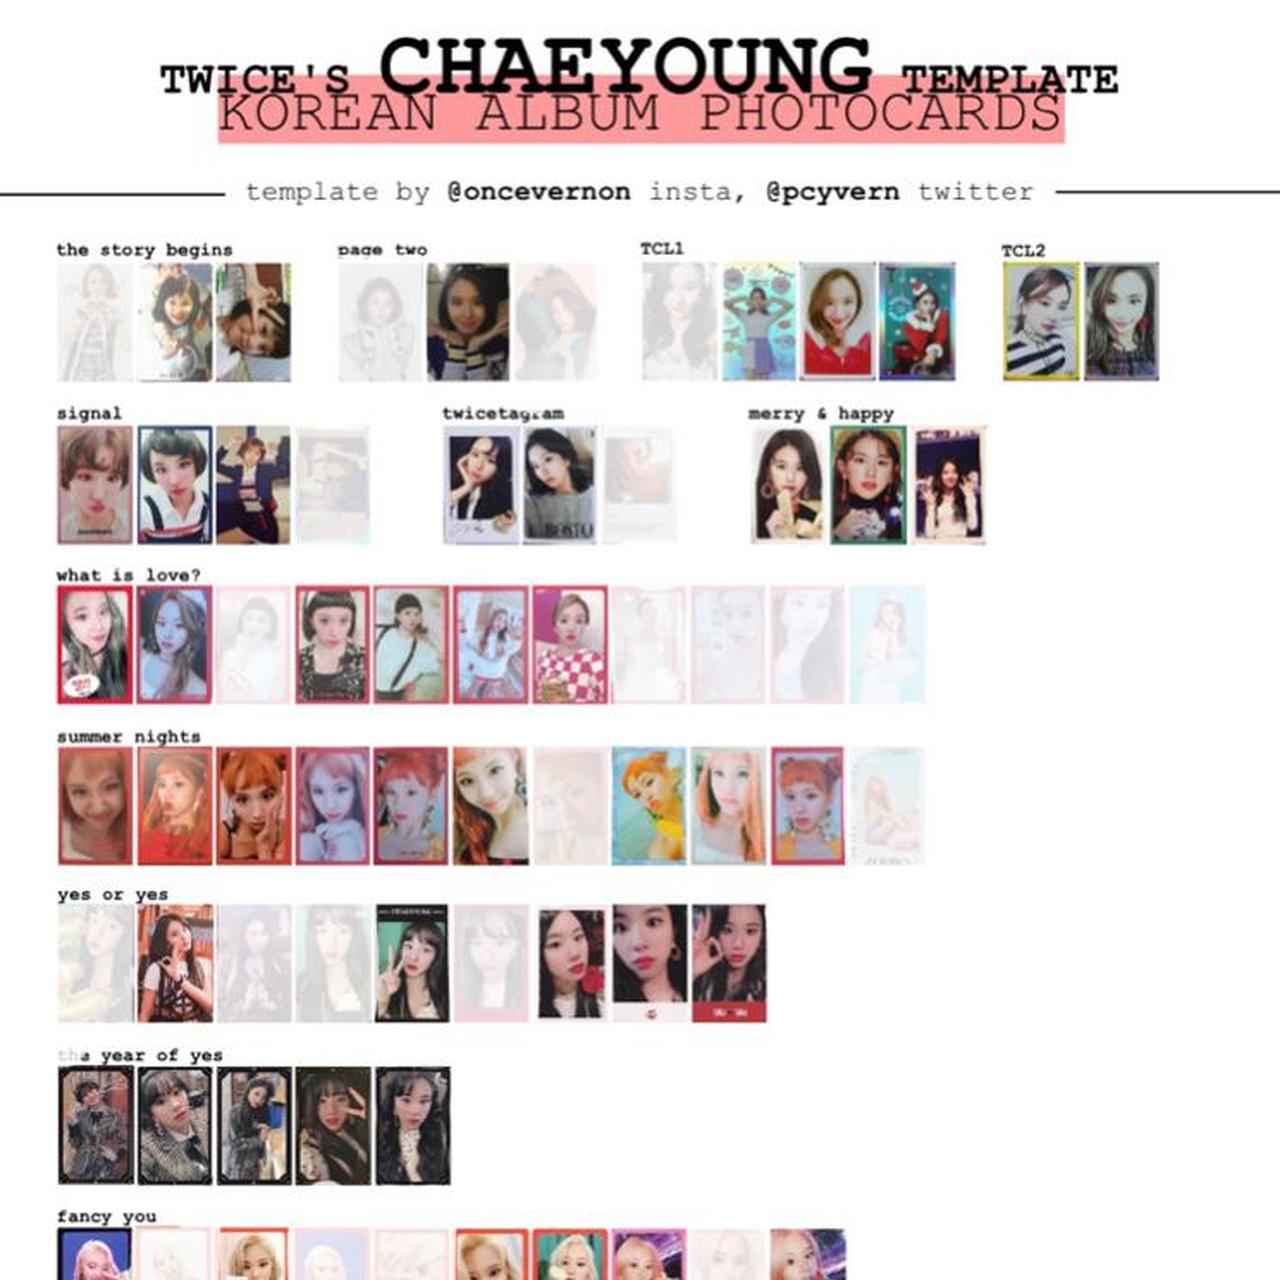 Product Image 2 - MY CHAEYOUNG WL
#kpop #twice #twicephotocard